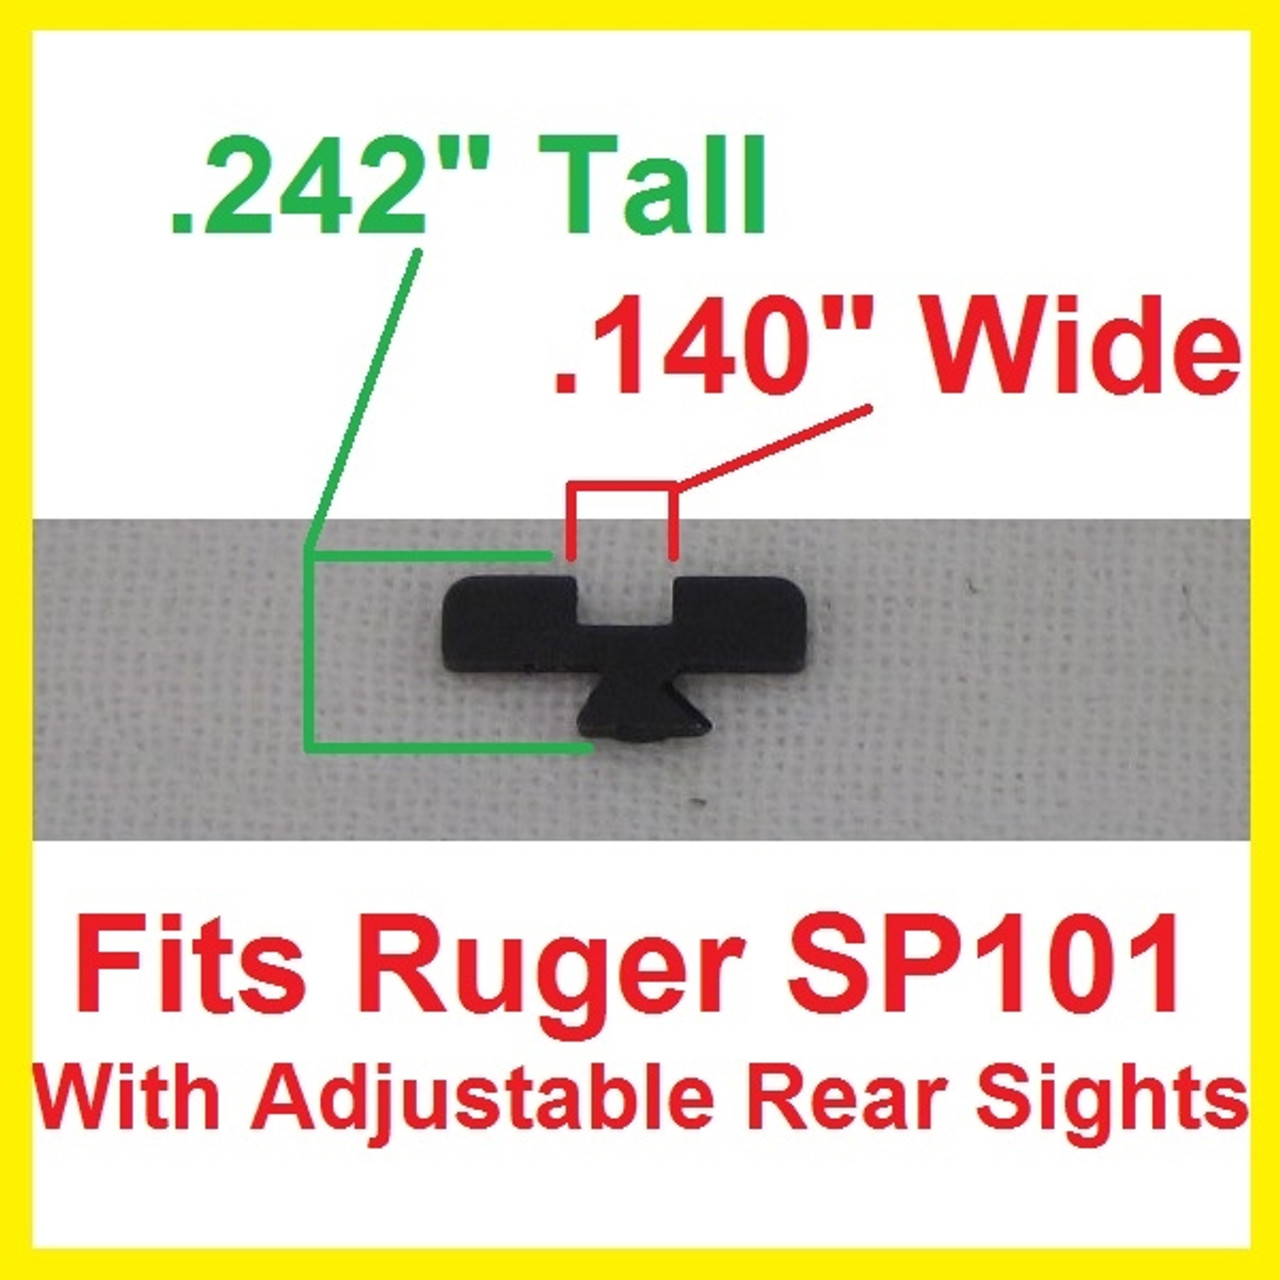 Factory Ruger Sight Blade for SP101 with Adjustable Rear Sight